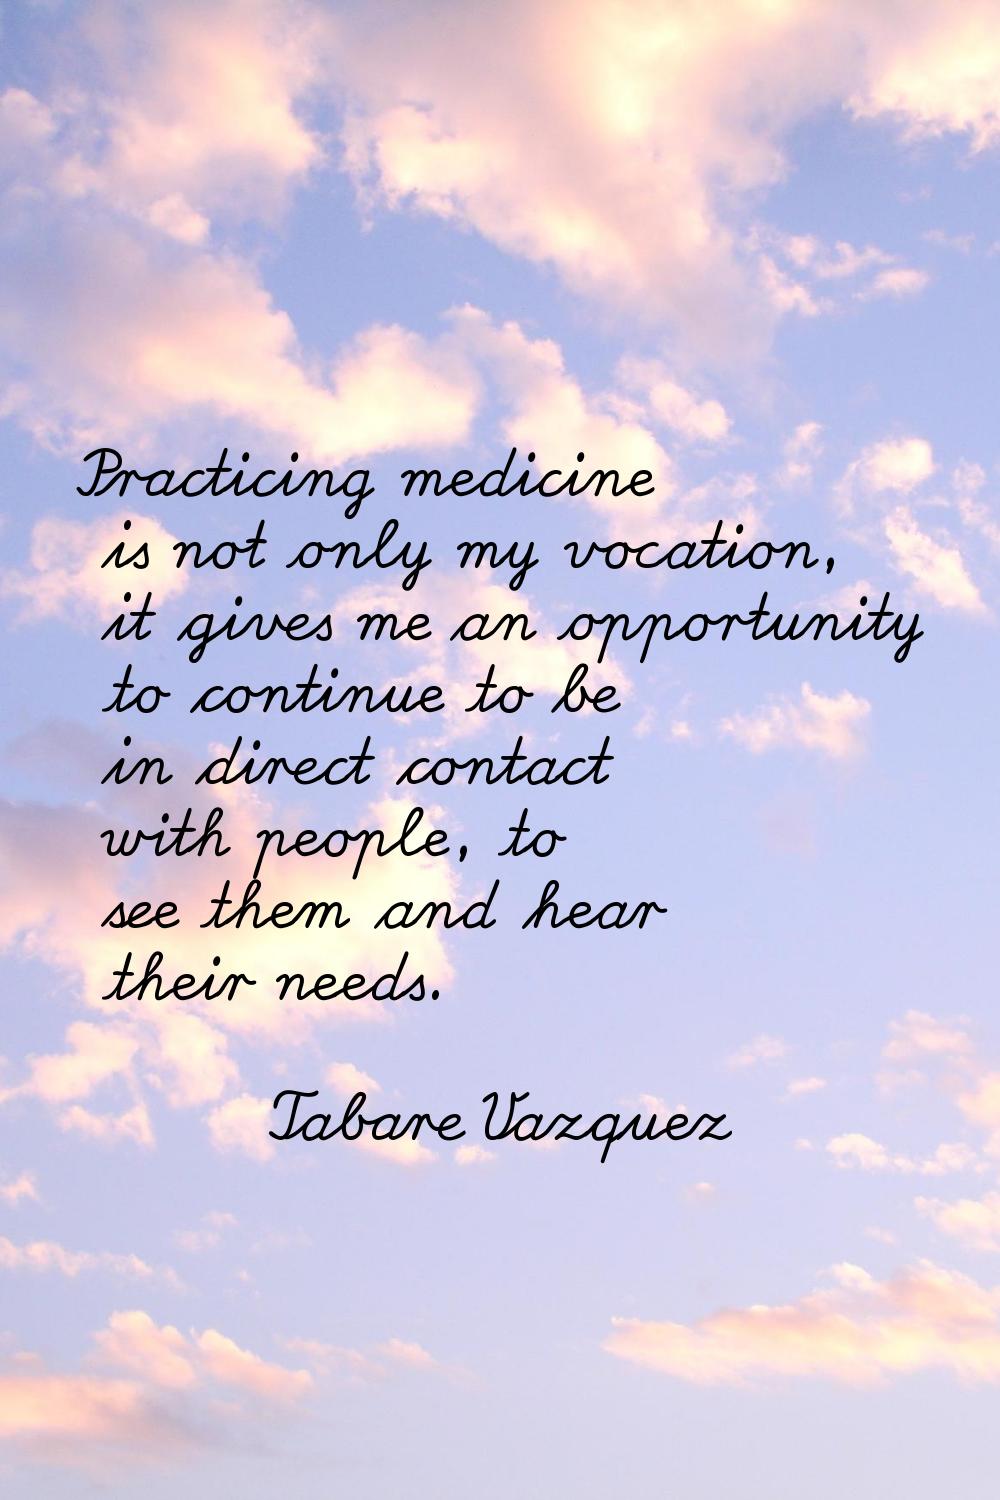 Practicing medicine is not only my vocation, it gives me an opportunity to continue to be in direct